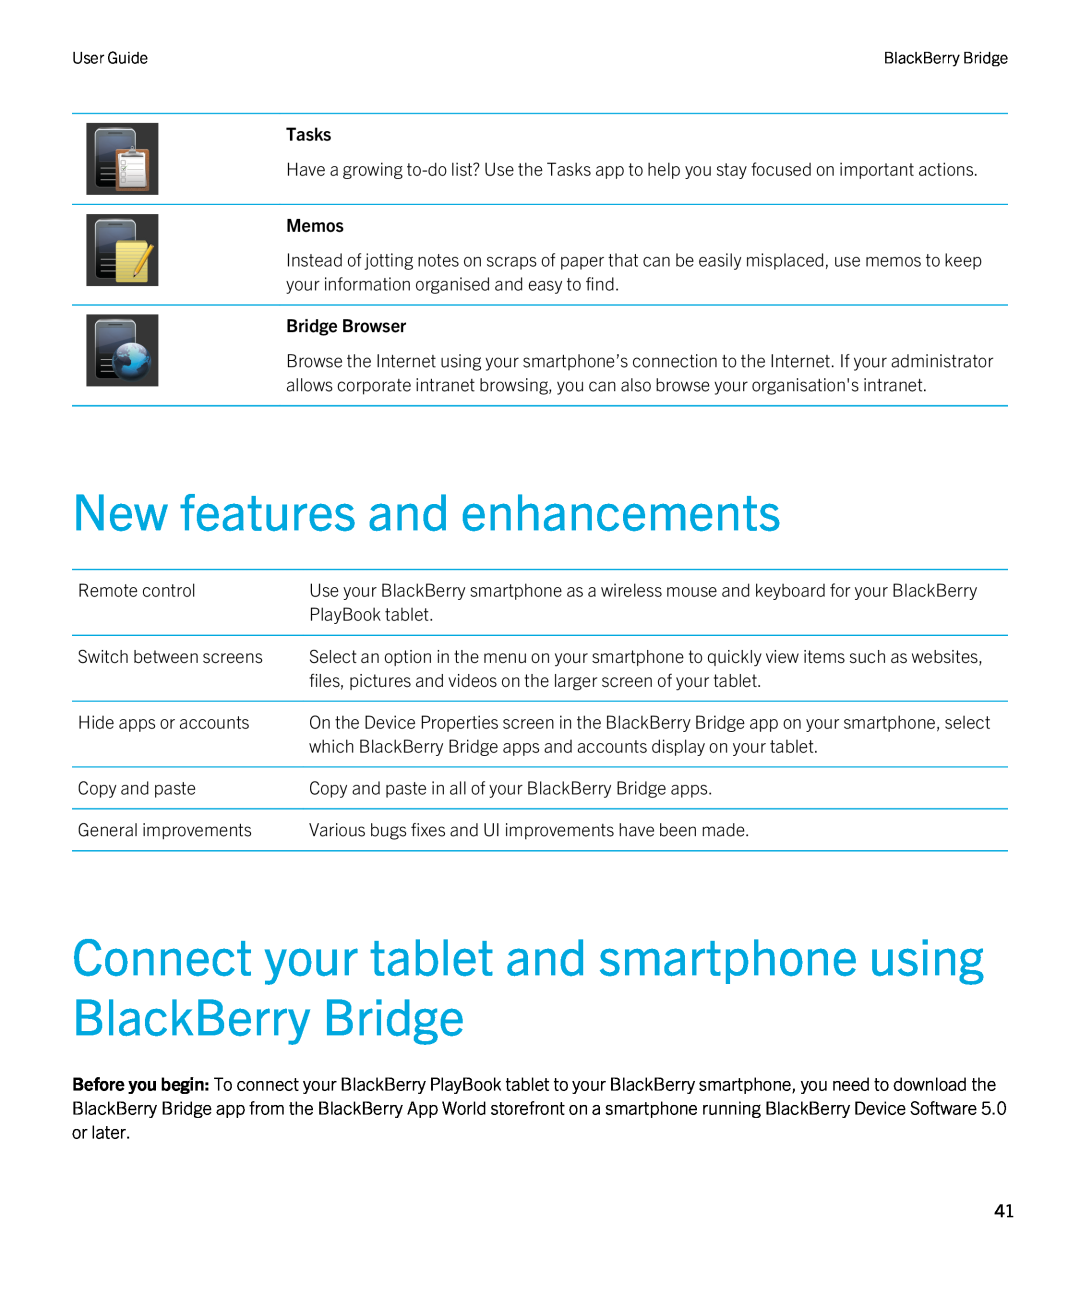 Blackberry 2.0.1 New features and enhancements, Connect your tablet and smartphone using BlackBerry Bridge, Tasks, Memos 